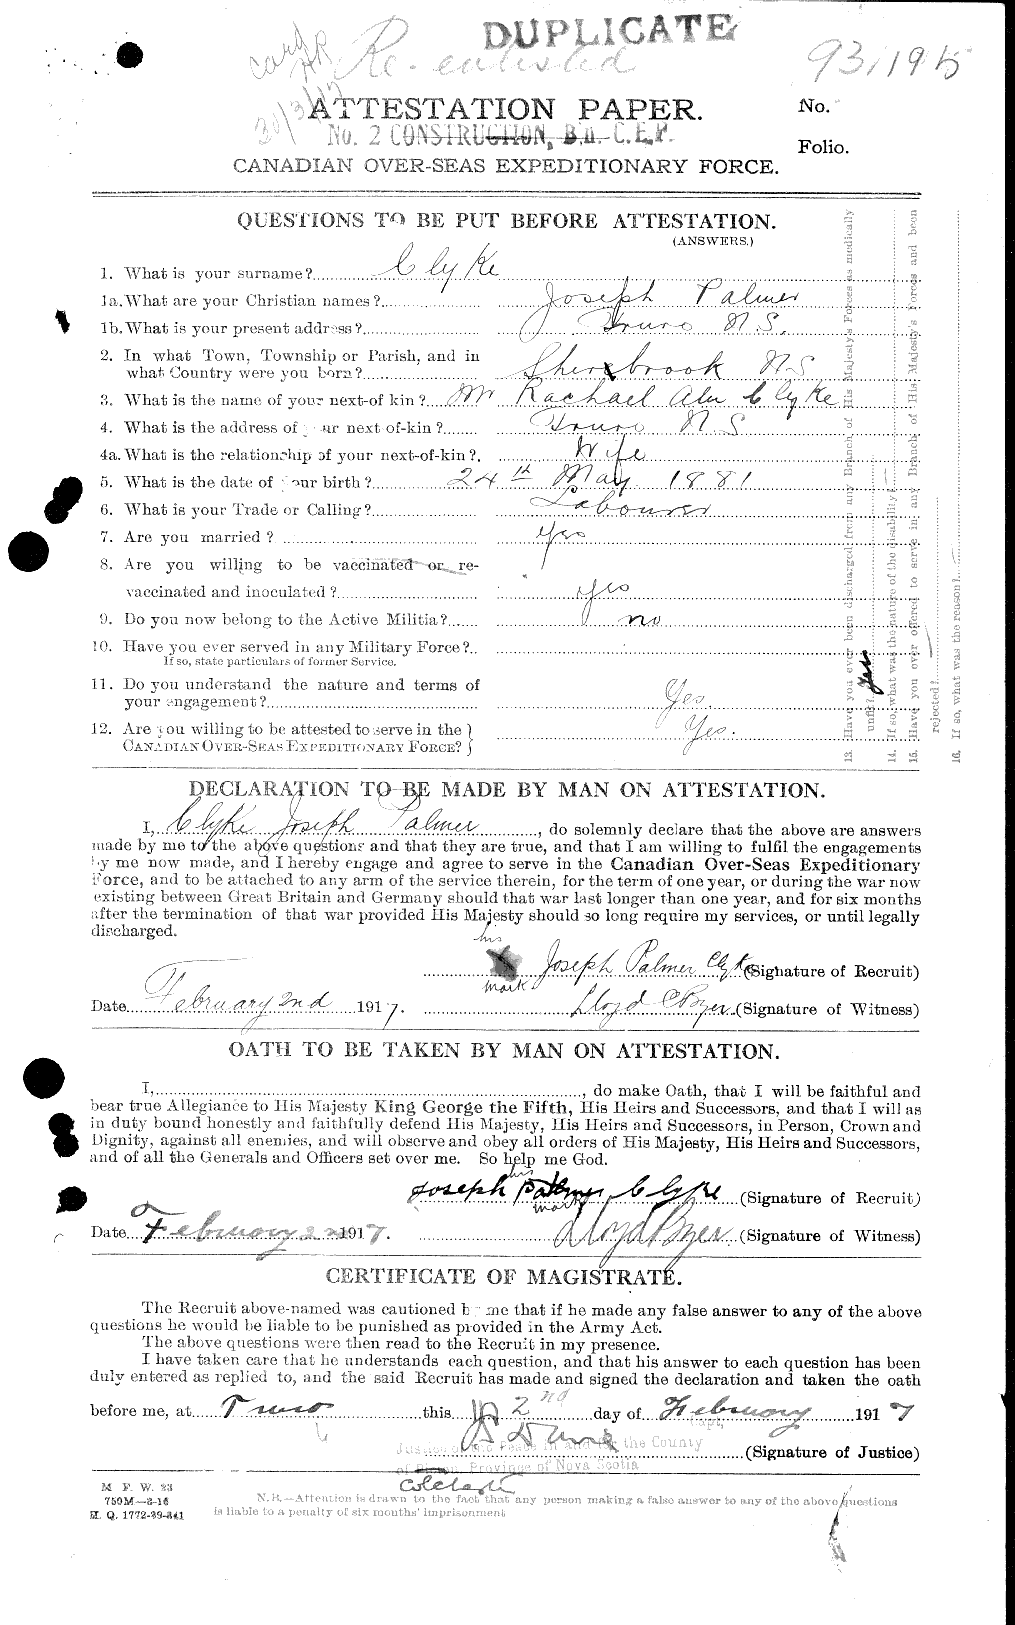 Personnel Records of the First World War - CEF 026324a